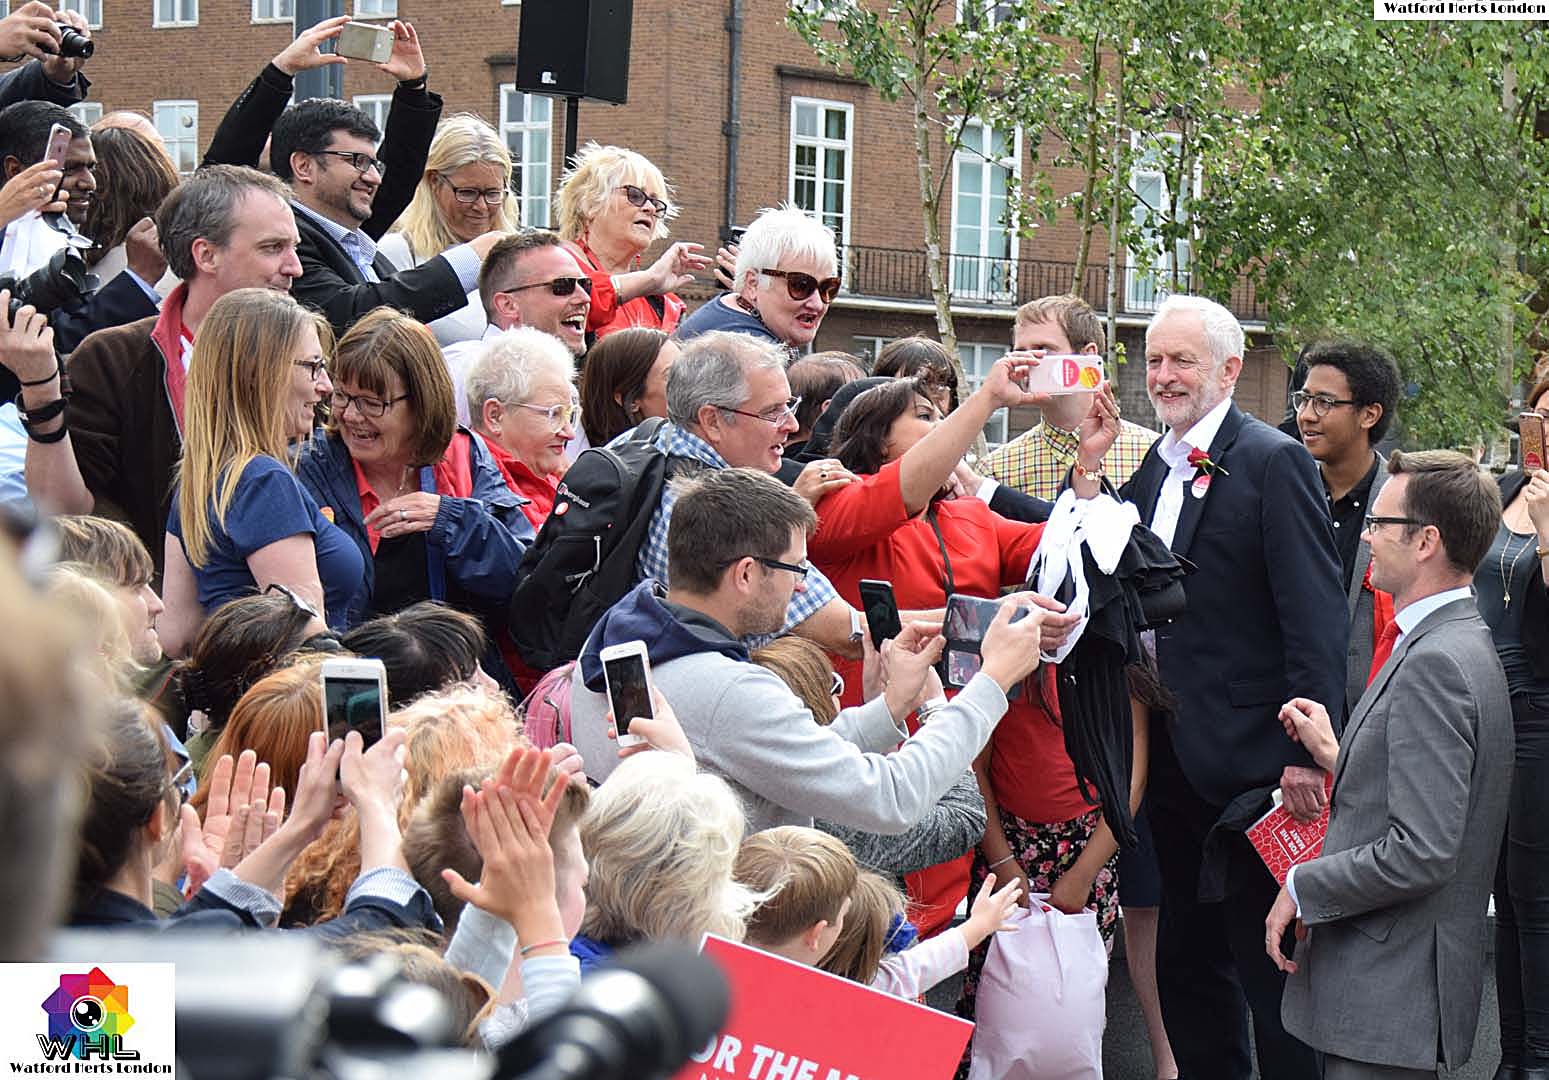 Jeremy Corbyn campaigning in Watford on Wednesday 7th june